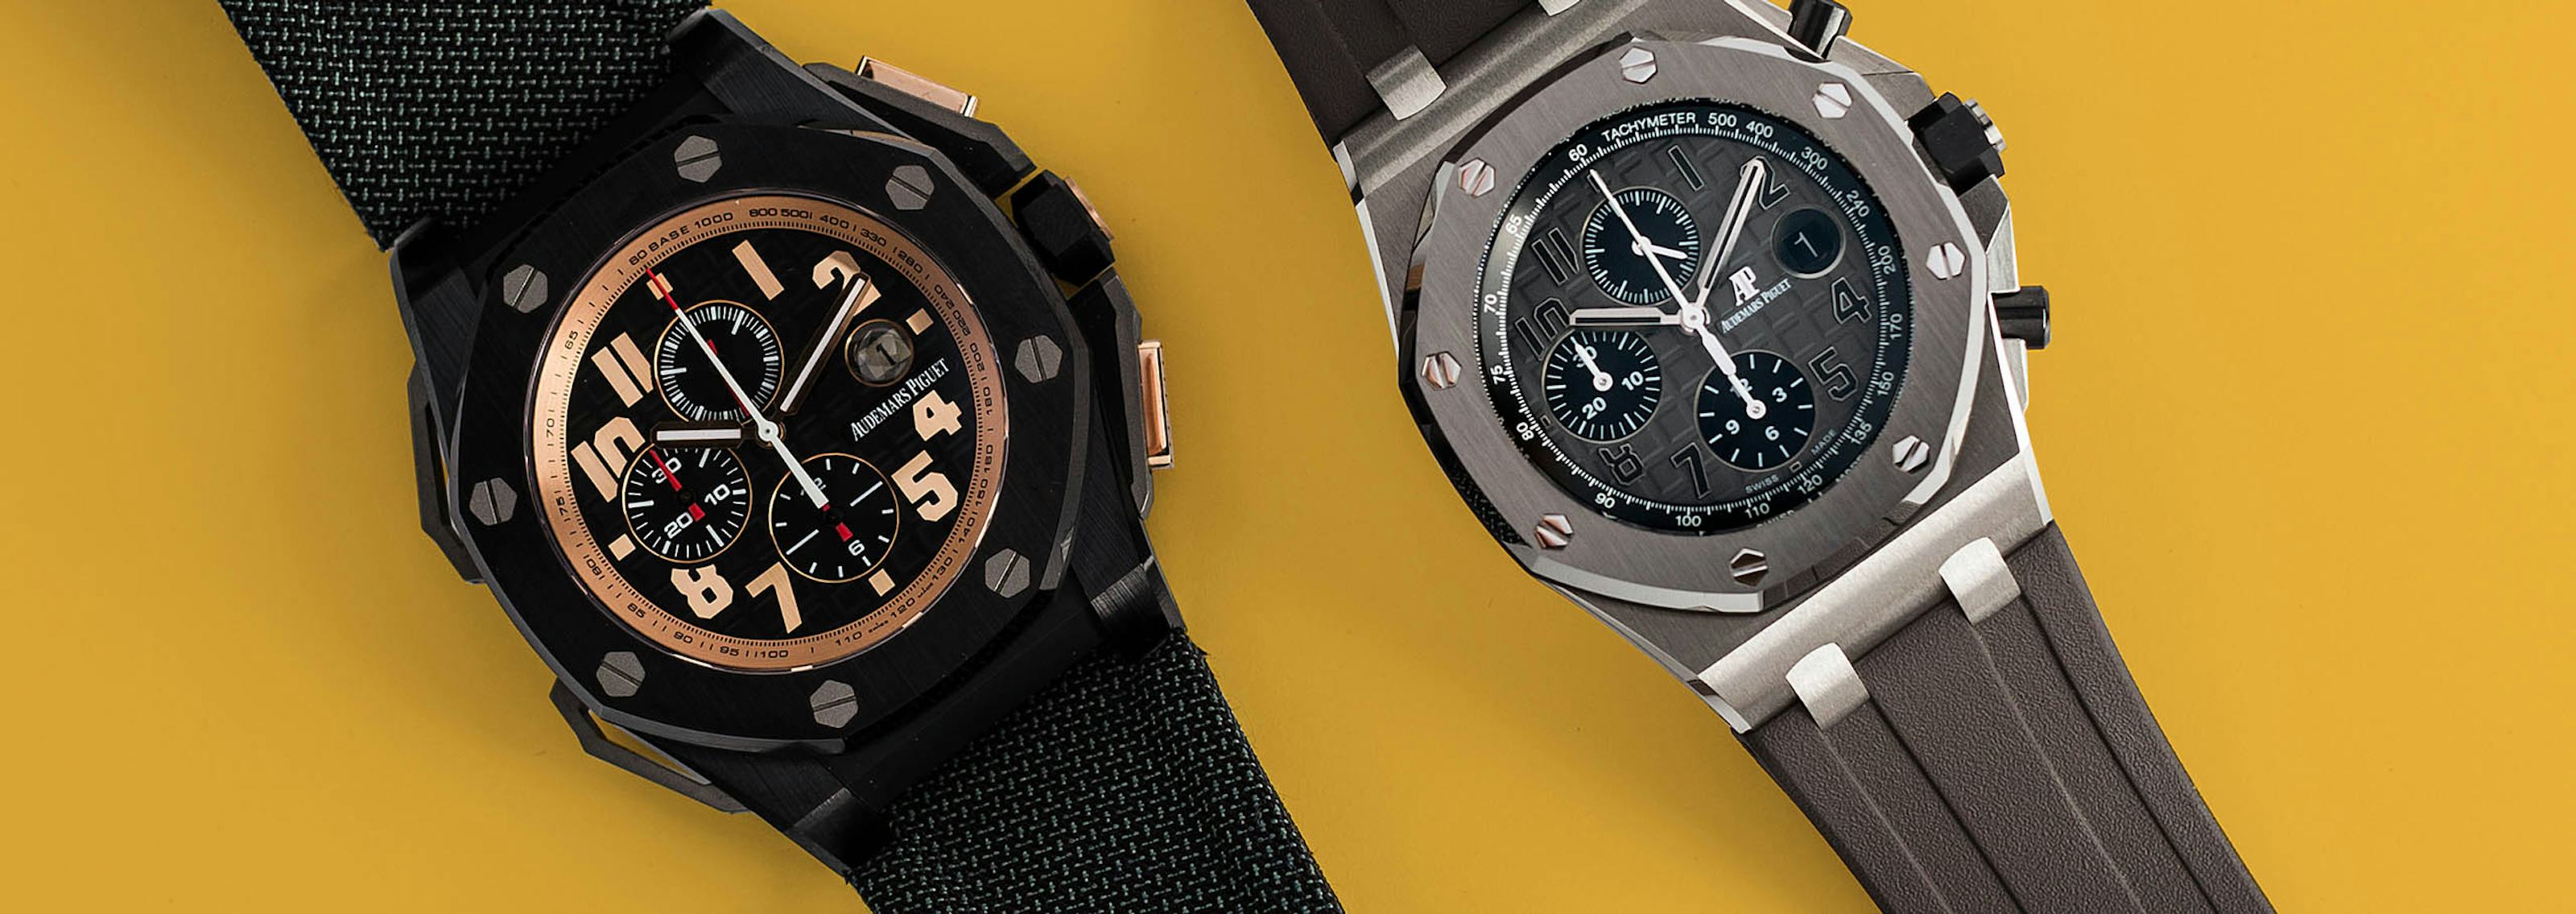 Why The Audemars Piguet Royal Oak Is One Of The Greatest Designs Ever ...